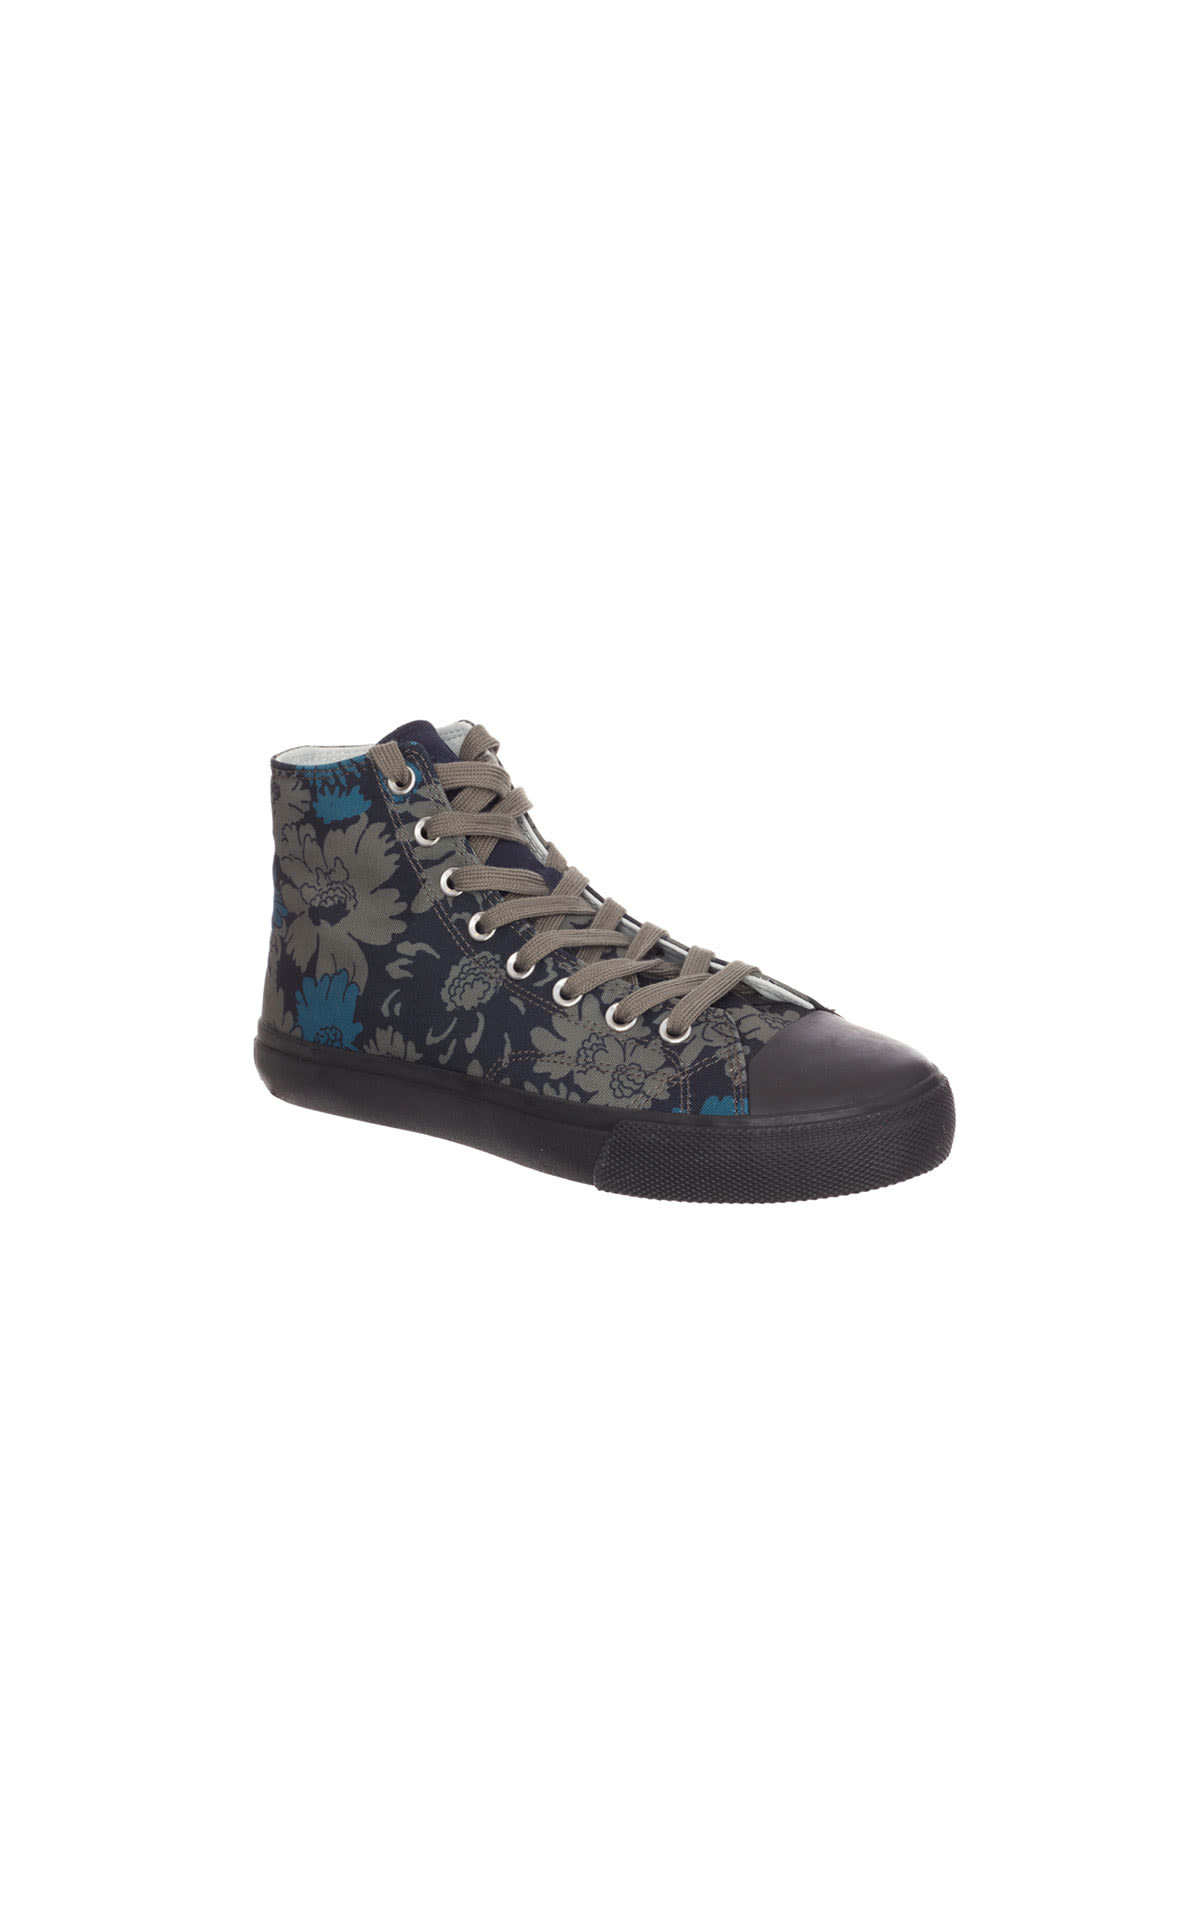 Paul Smith Floral print carver sneakers from Bicester Village